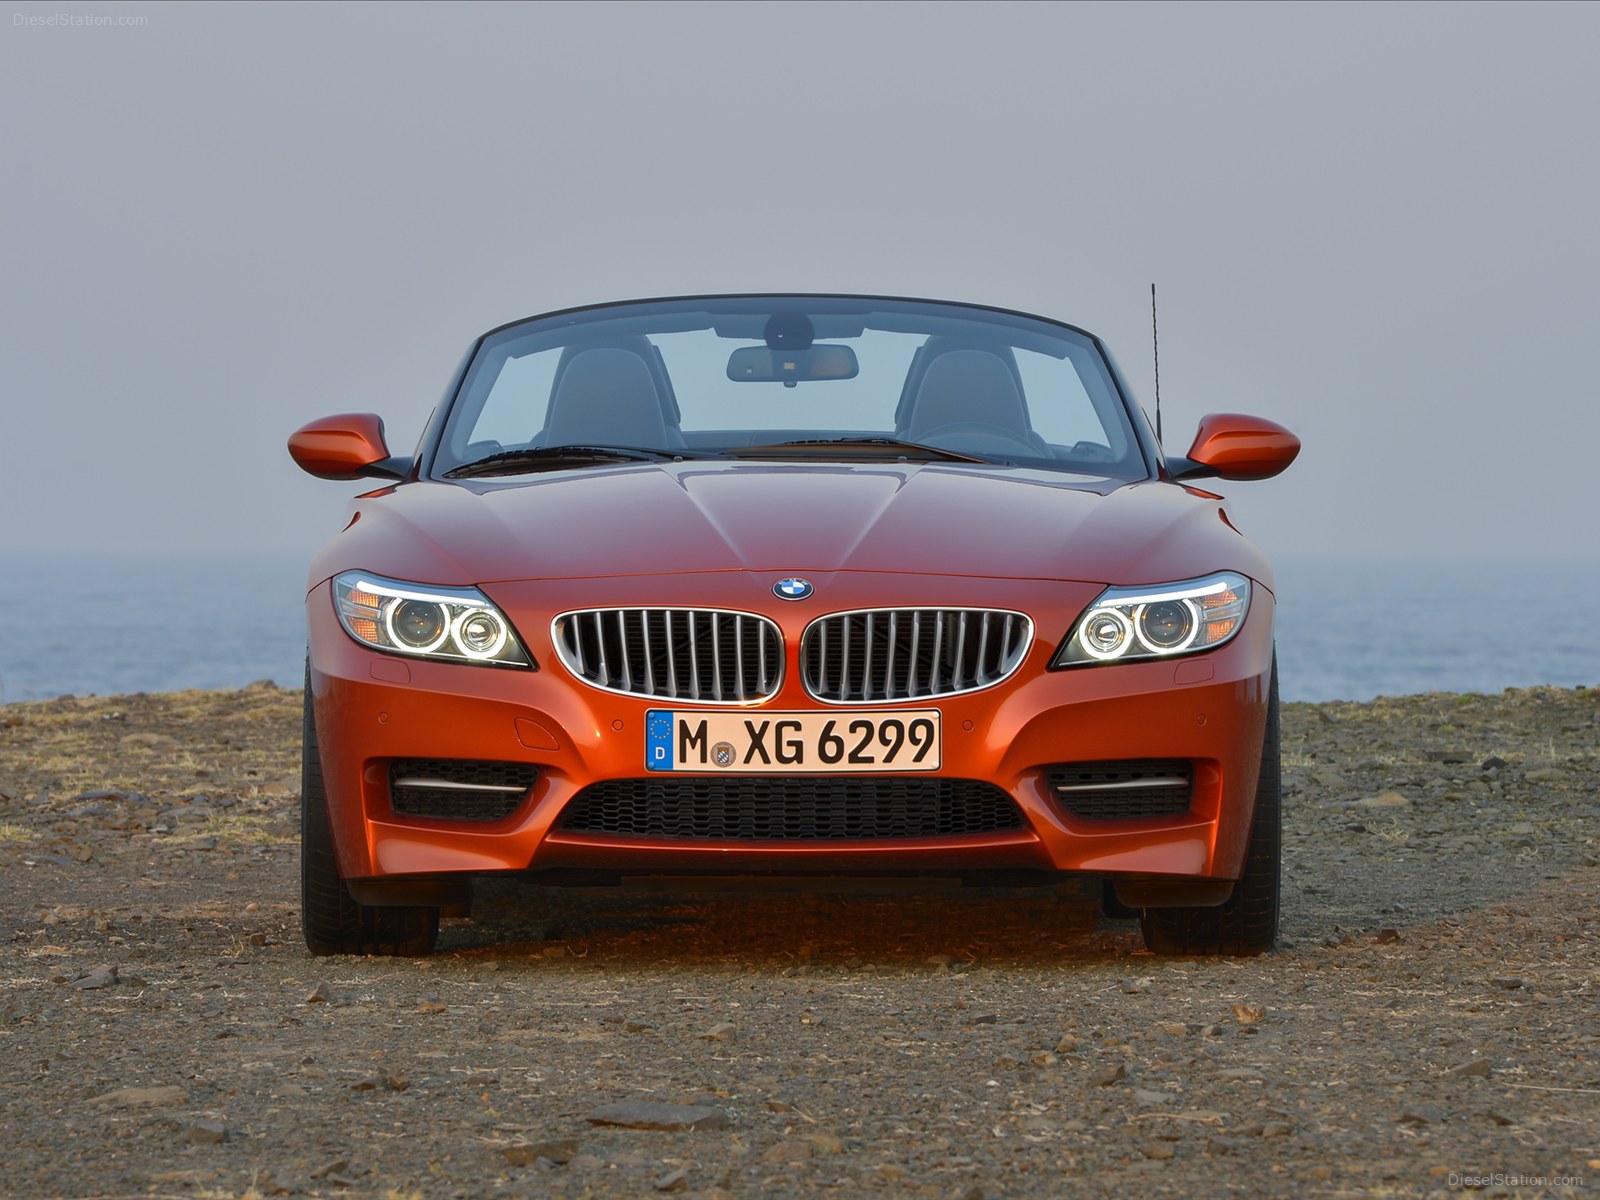 BMW Launches 2014 Z4 Roadster in India at Rs 68.9 lakh